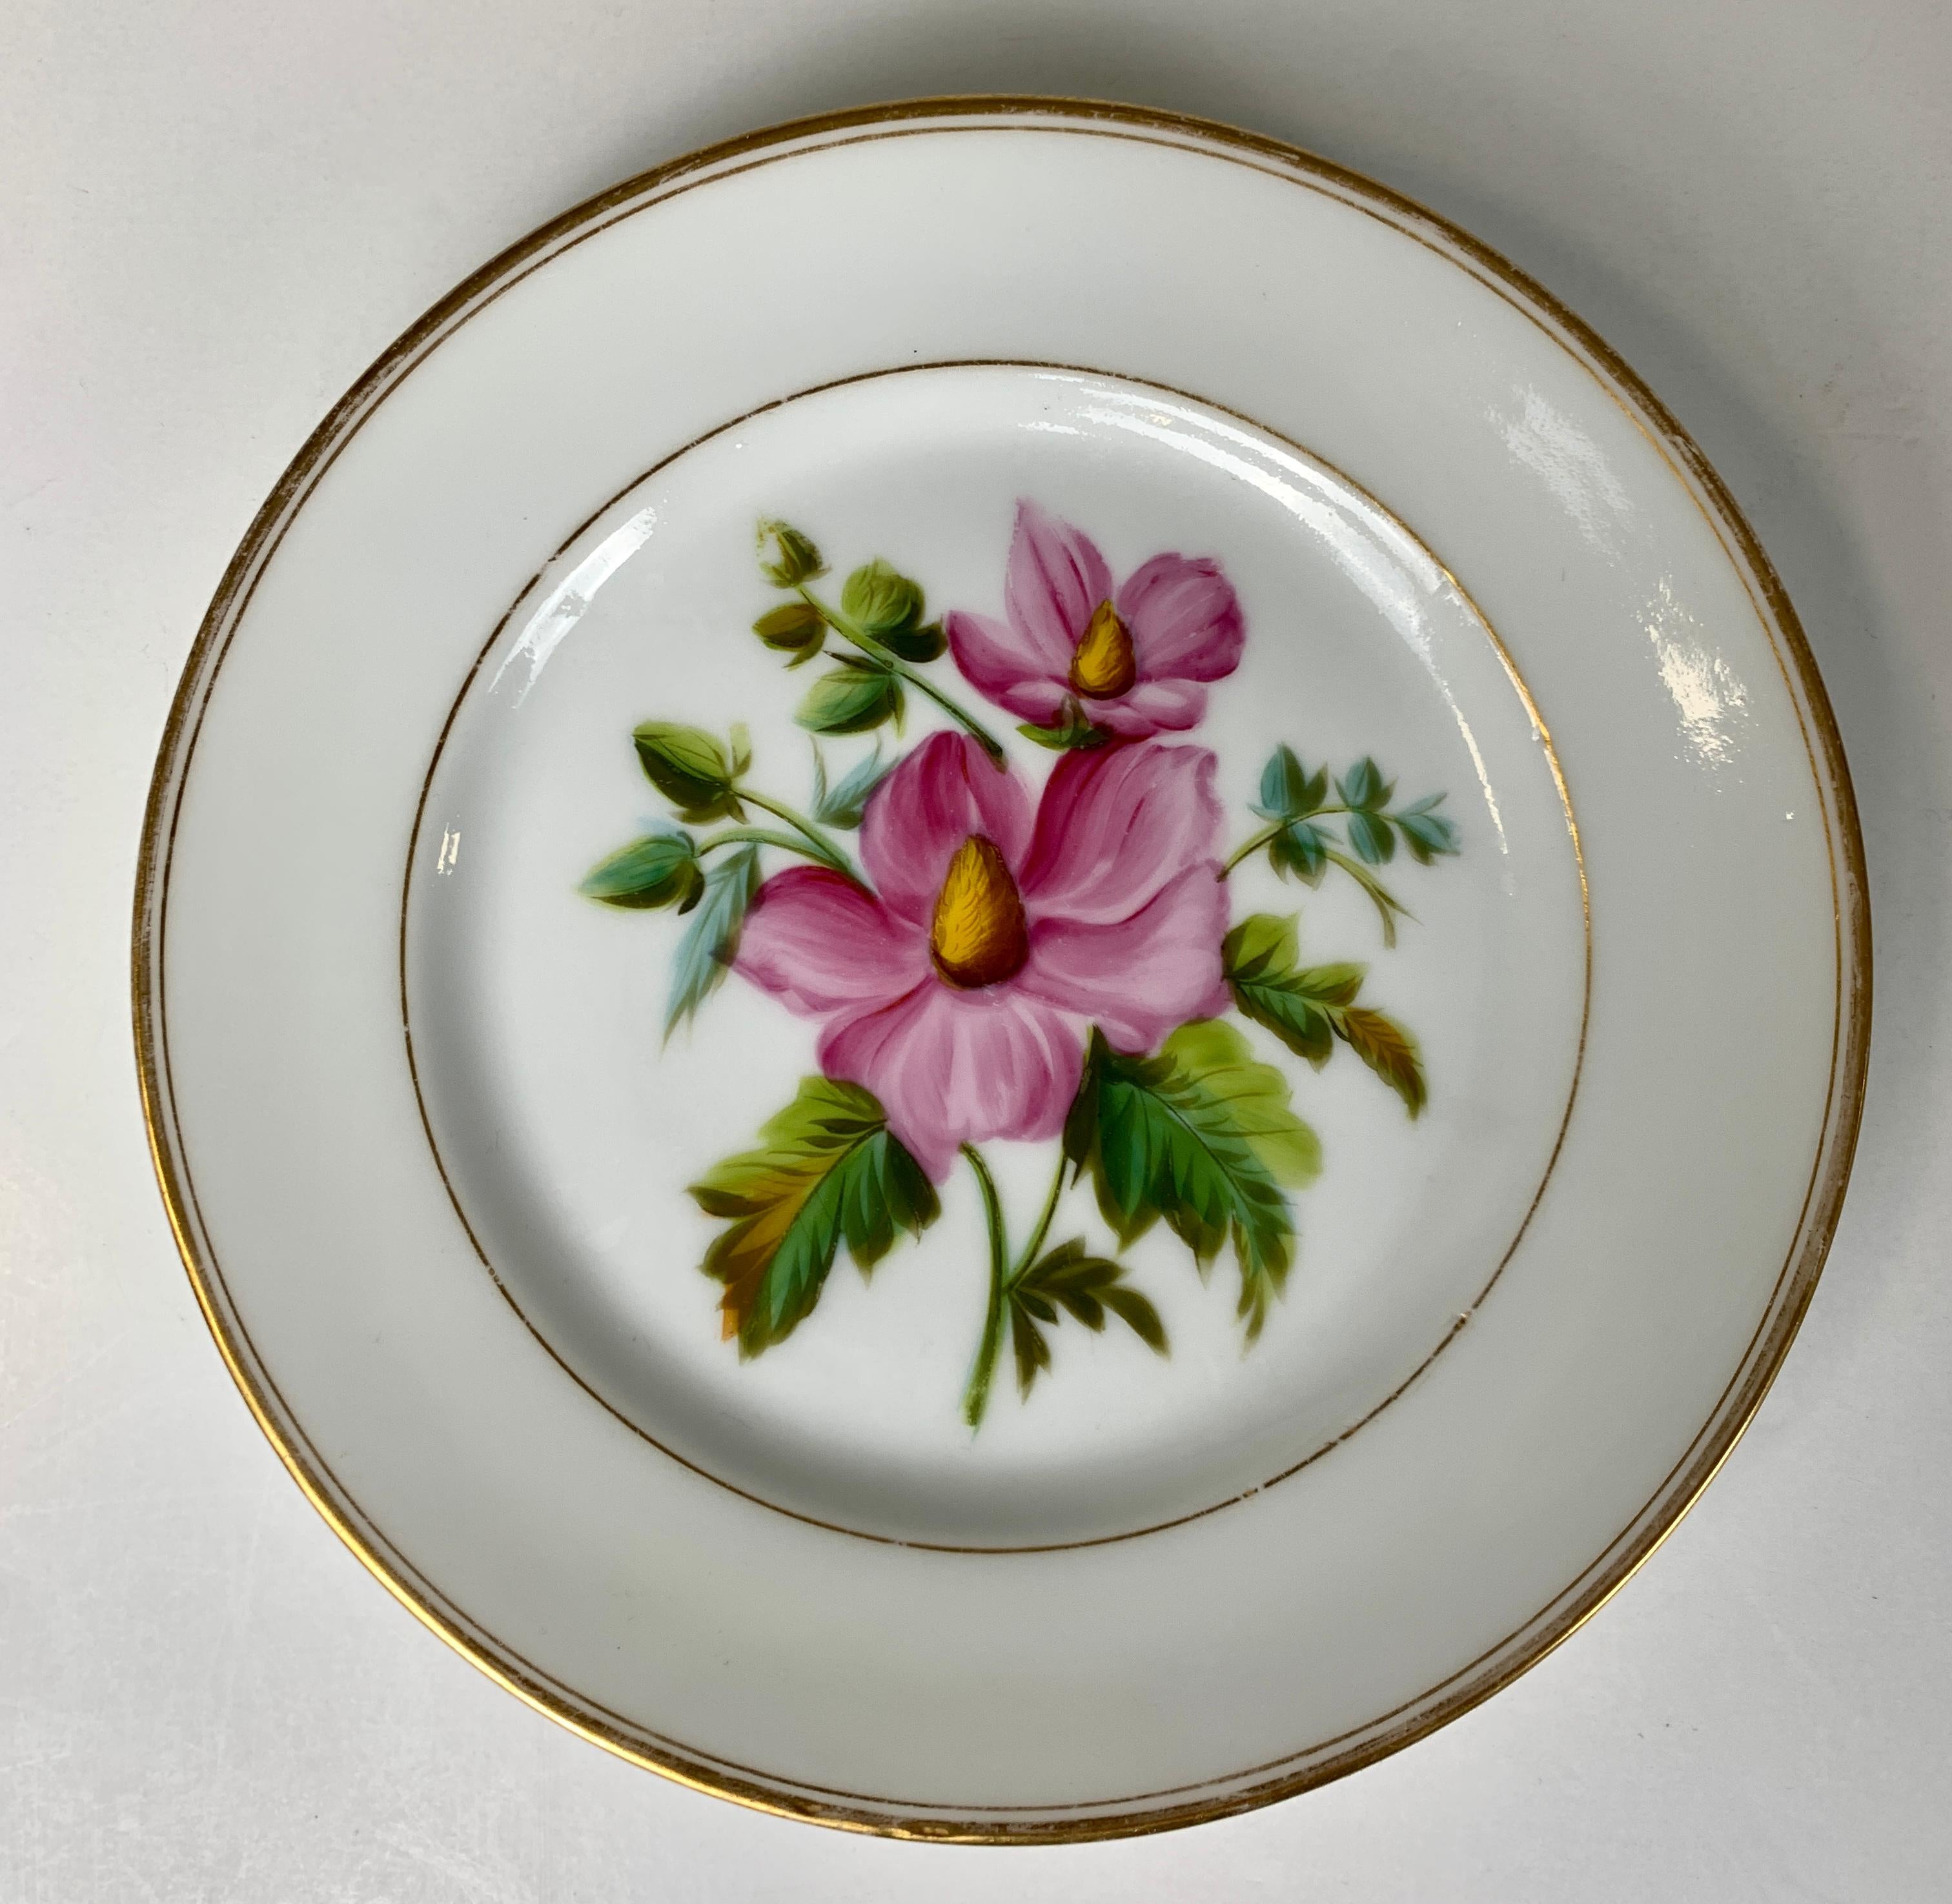 This pair of Paris porcelain botanical dishes each show a single exquisite plant with purple-pink flowers.
The dishes were made by Feuillet and retailed by Chevet in mid 19th century France. 
Both dishes are marked. One of the pair with a printed